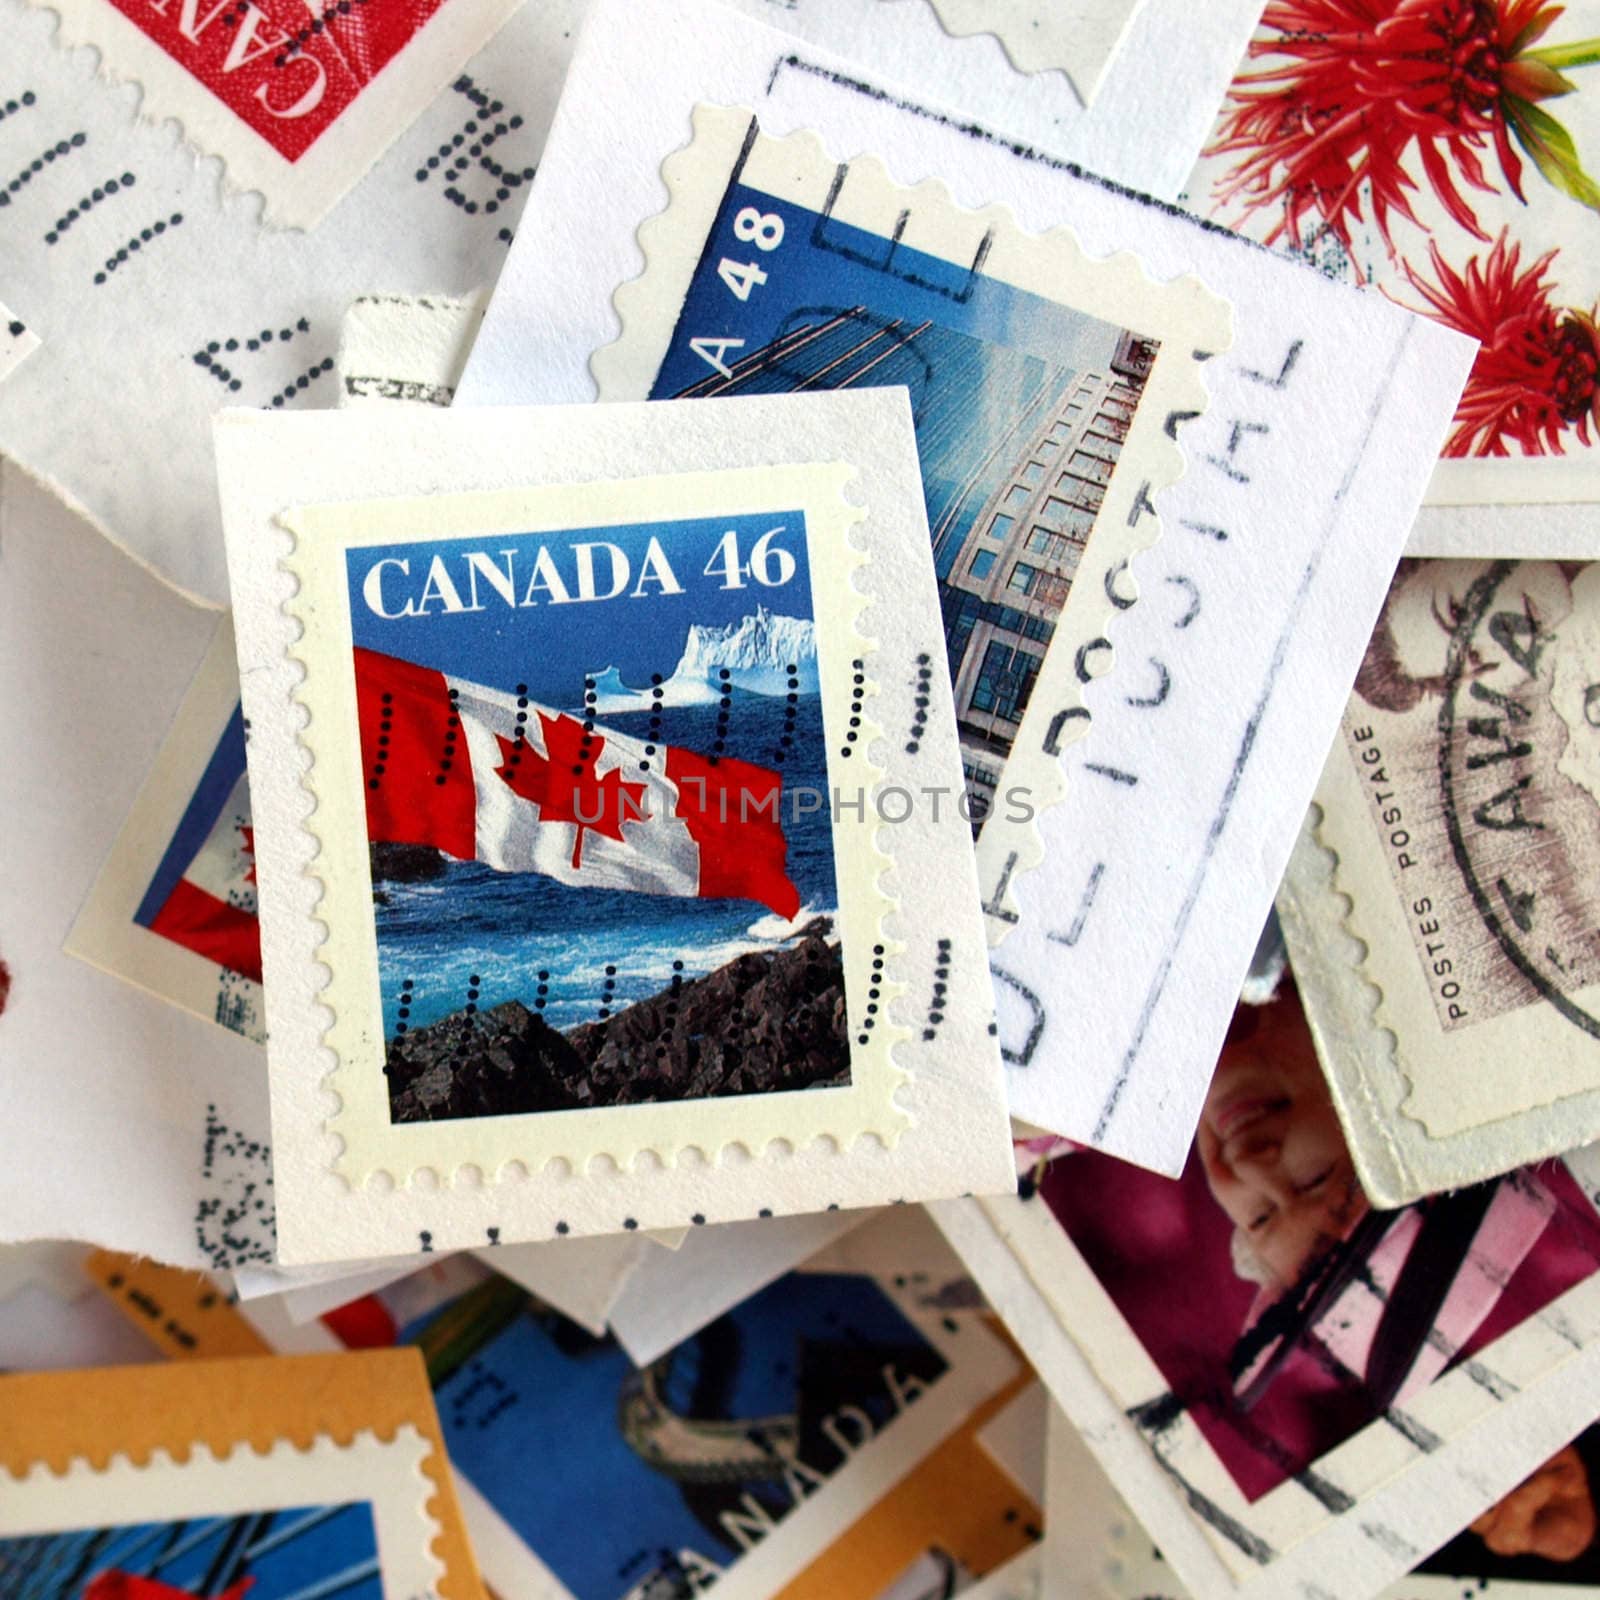 Range of Canadian postage stamps from Canada